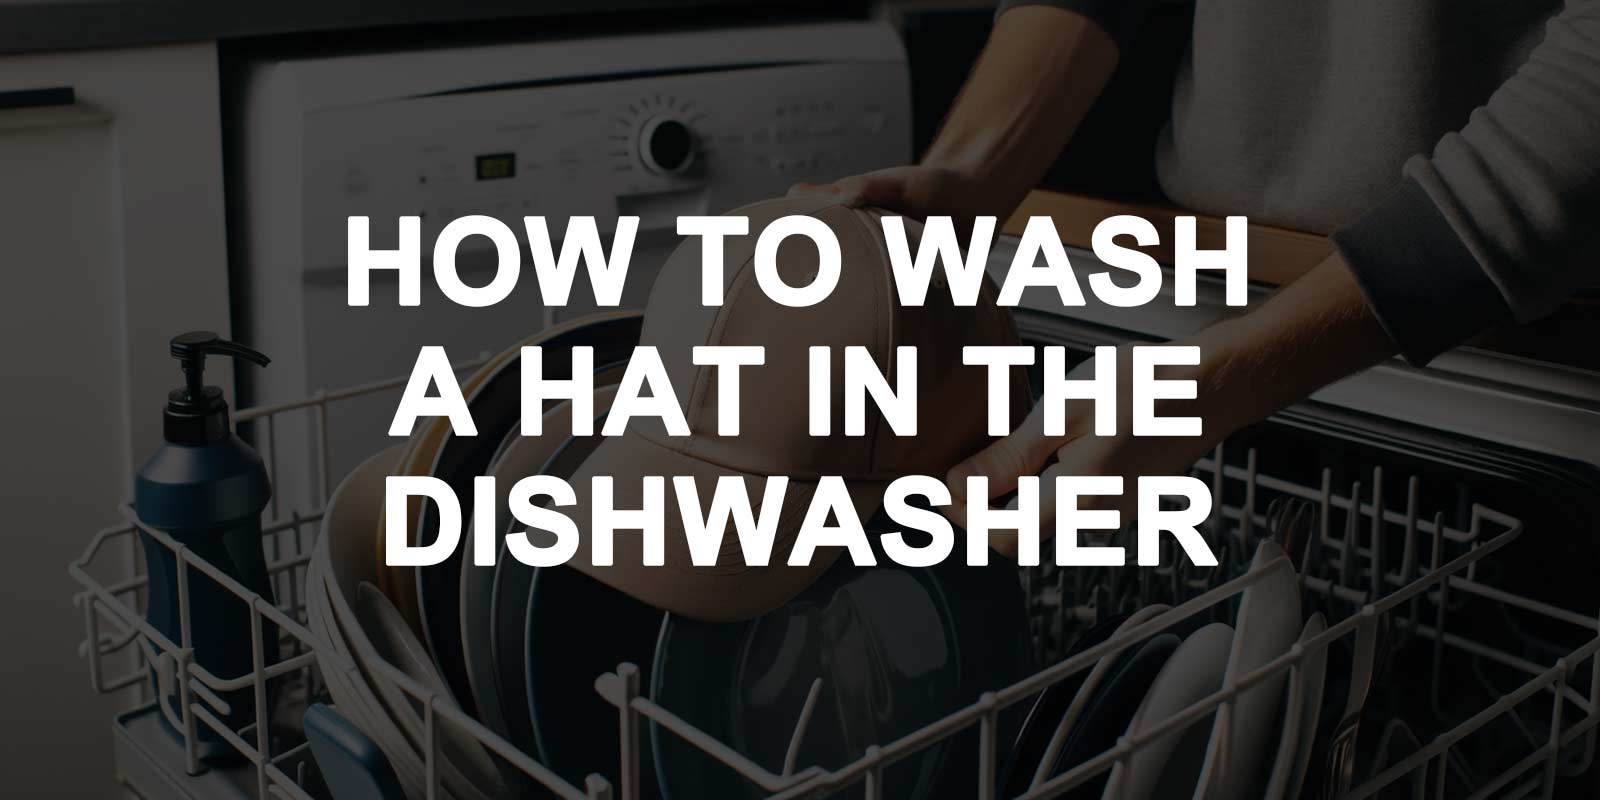 wash a hat in the dishwasher